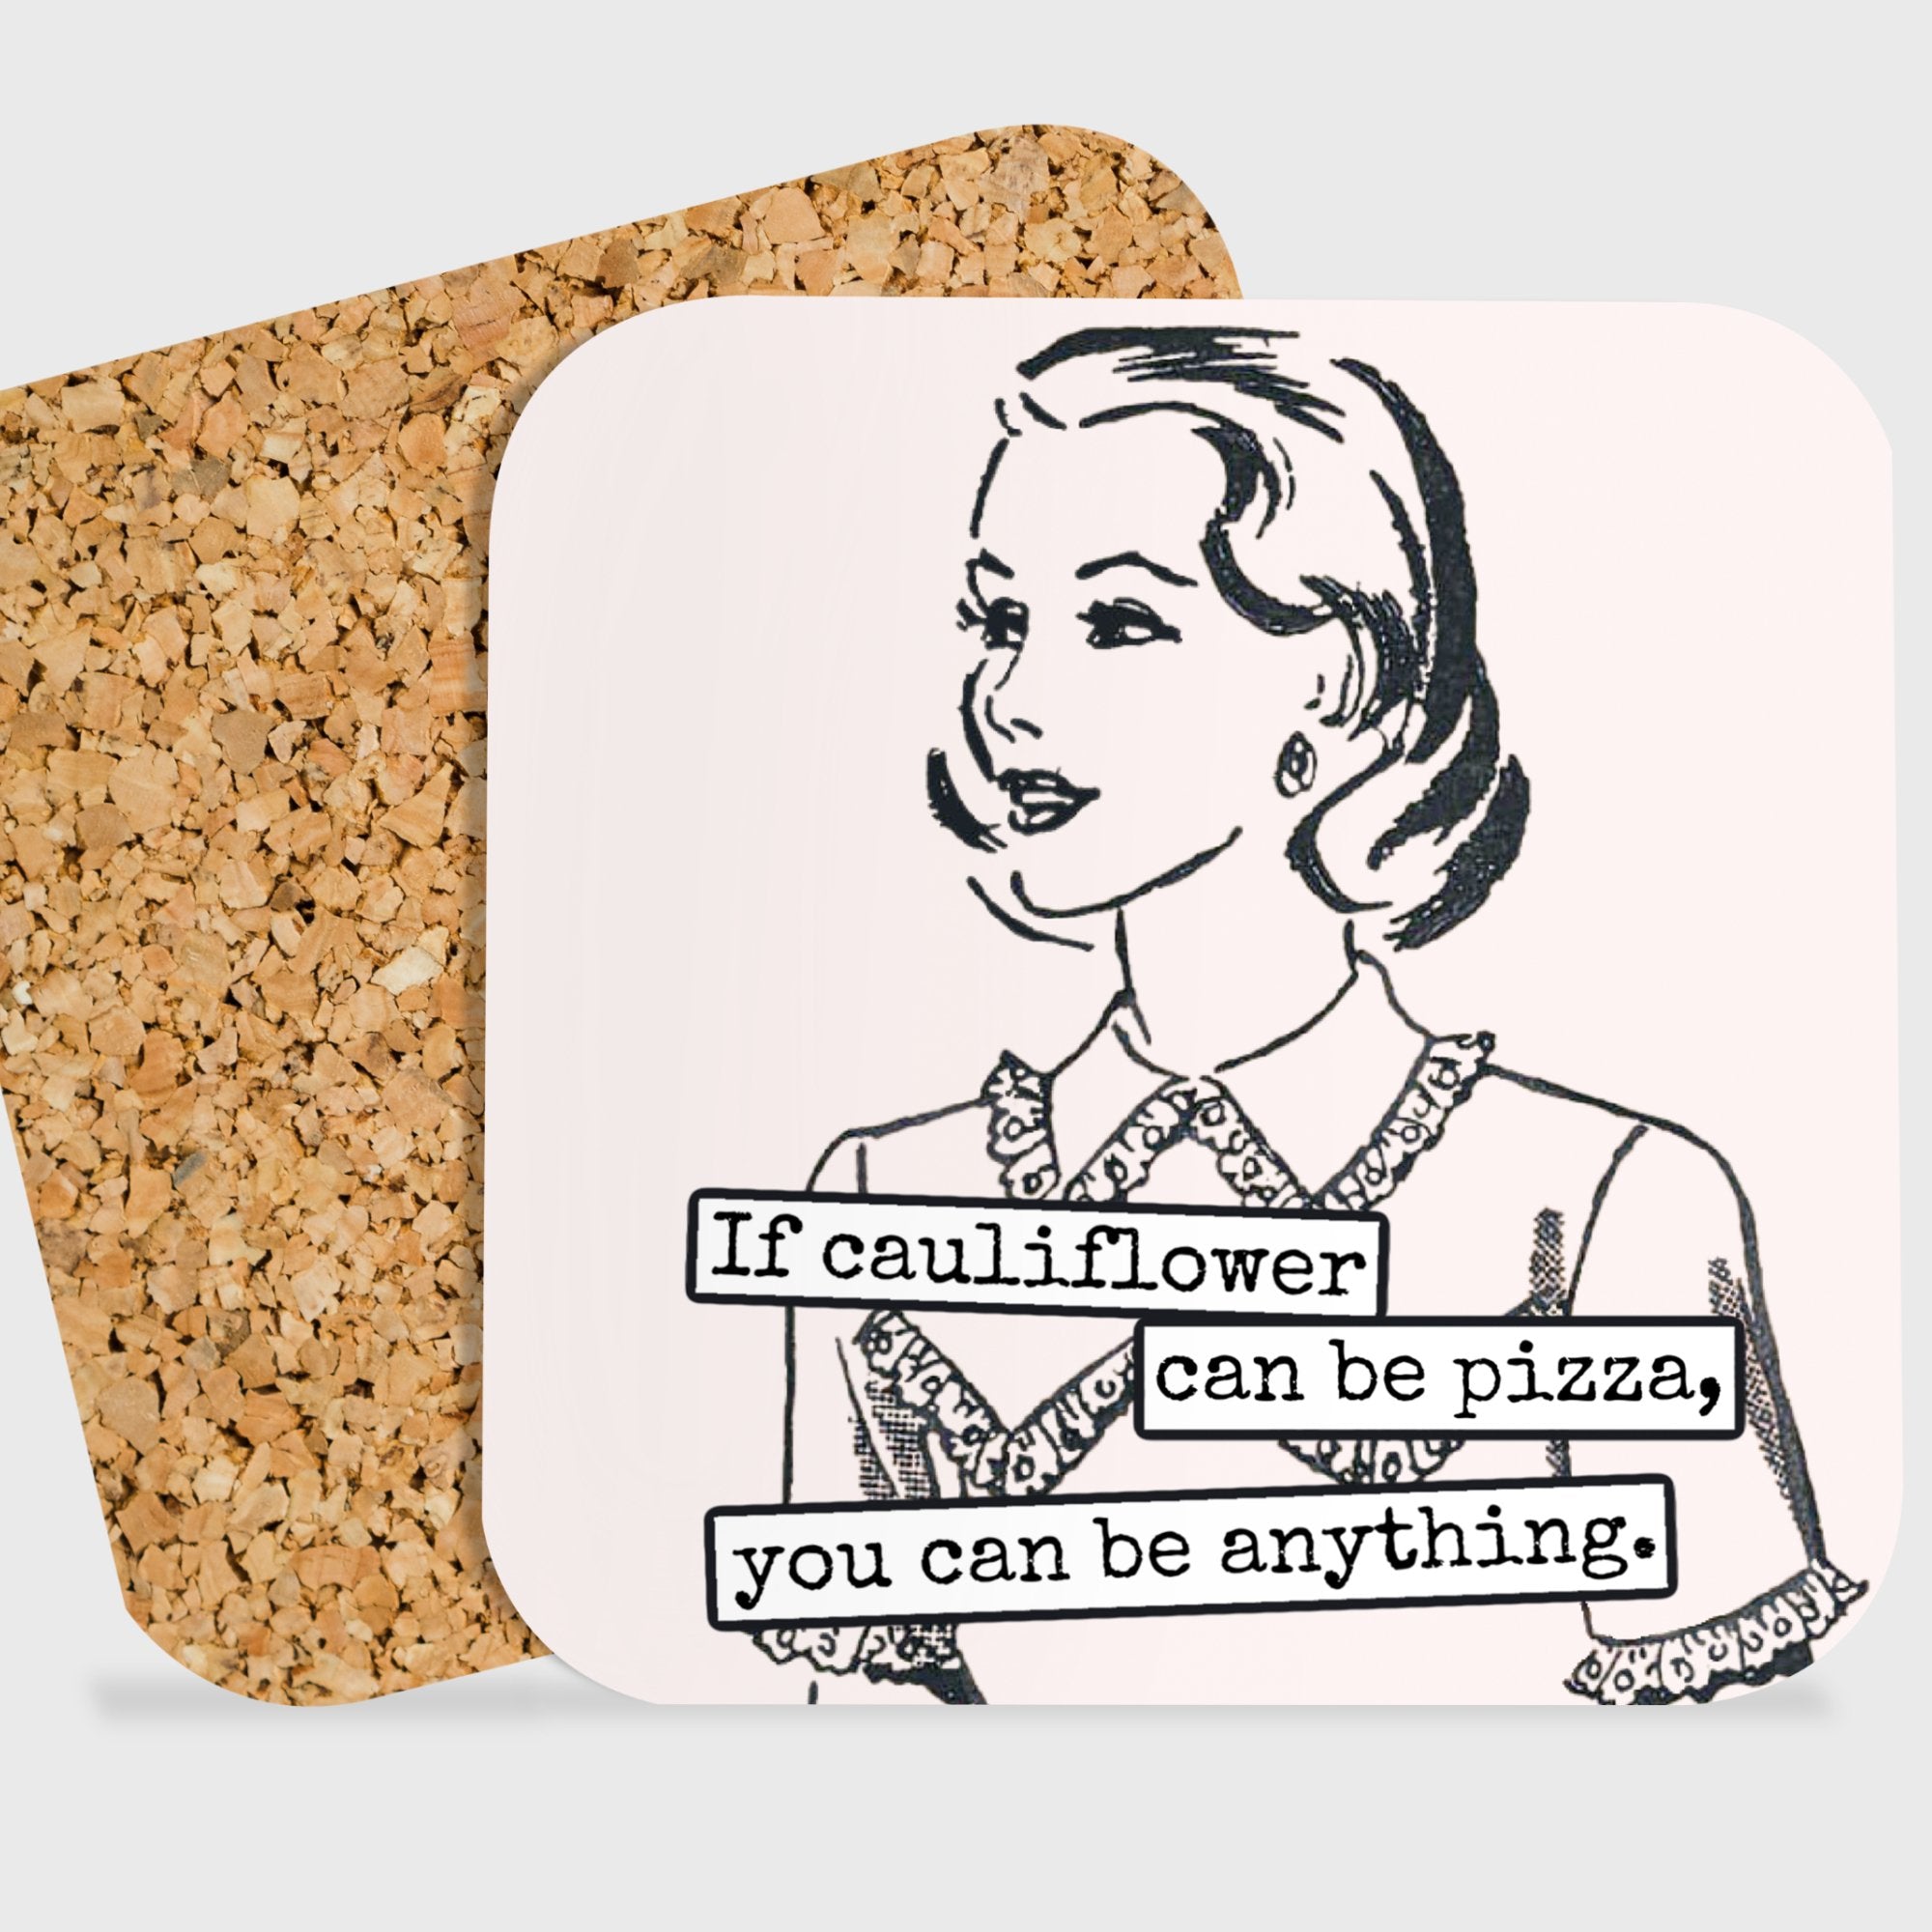 COASTER. If Cauliflower Can be Pizza, Then You Can be... - My Filosophy